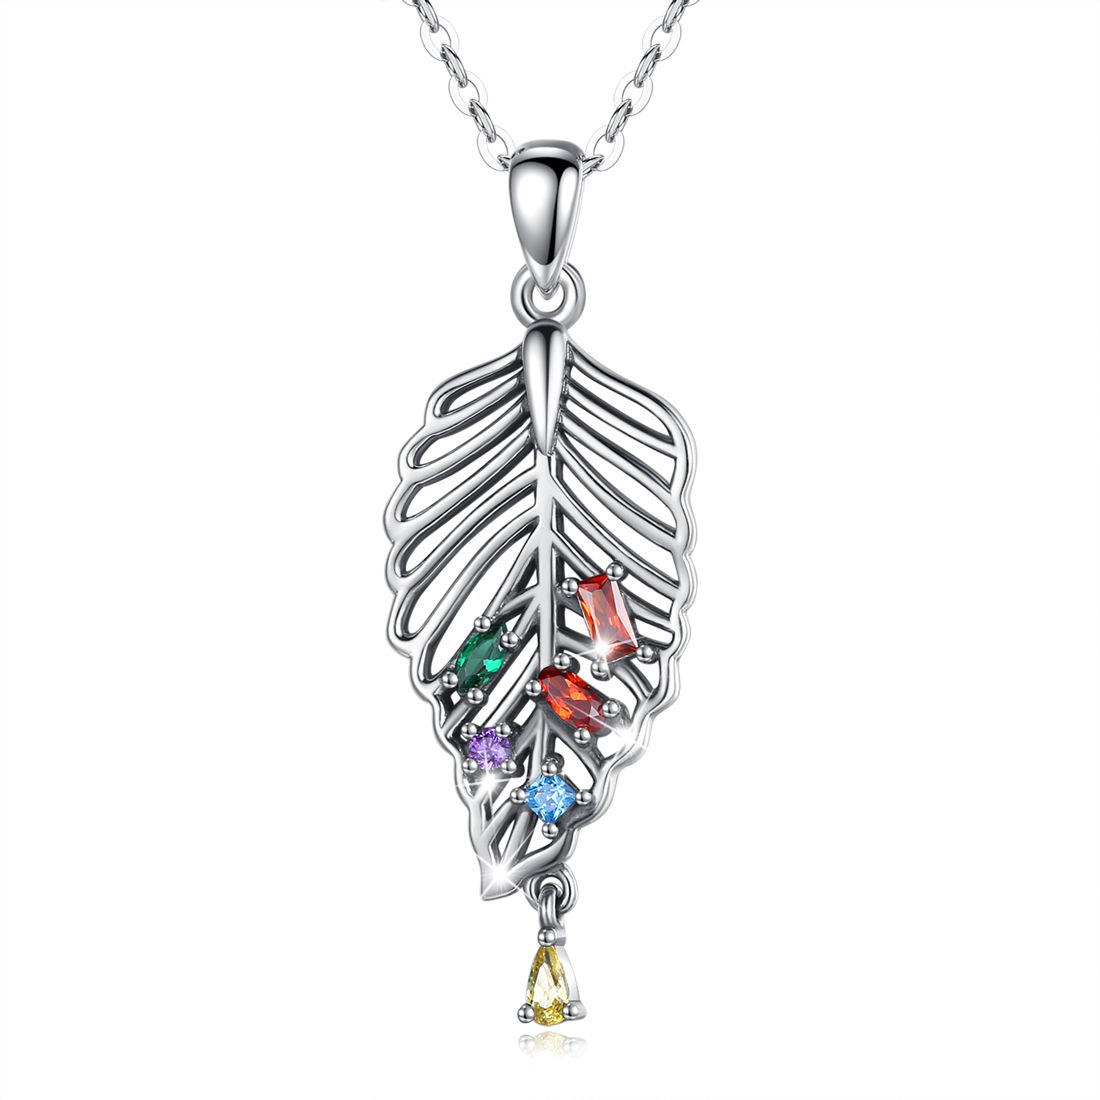 Merryshine Jewelry New Design S925 Sterling Silver Leaf Necklace With